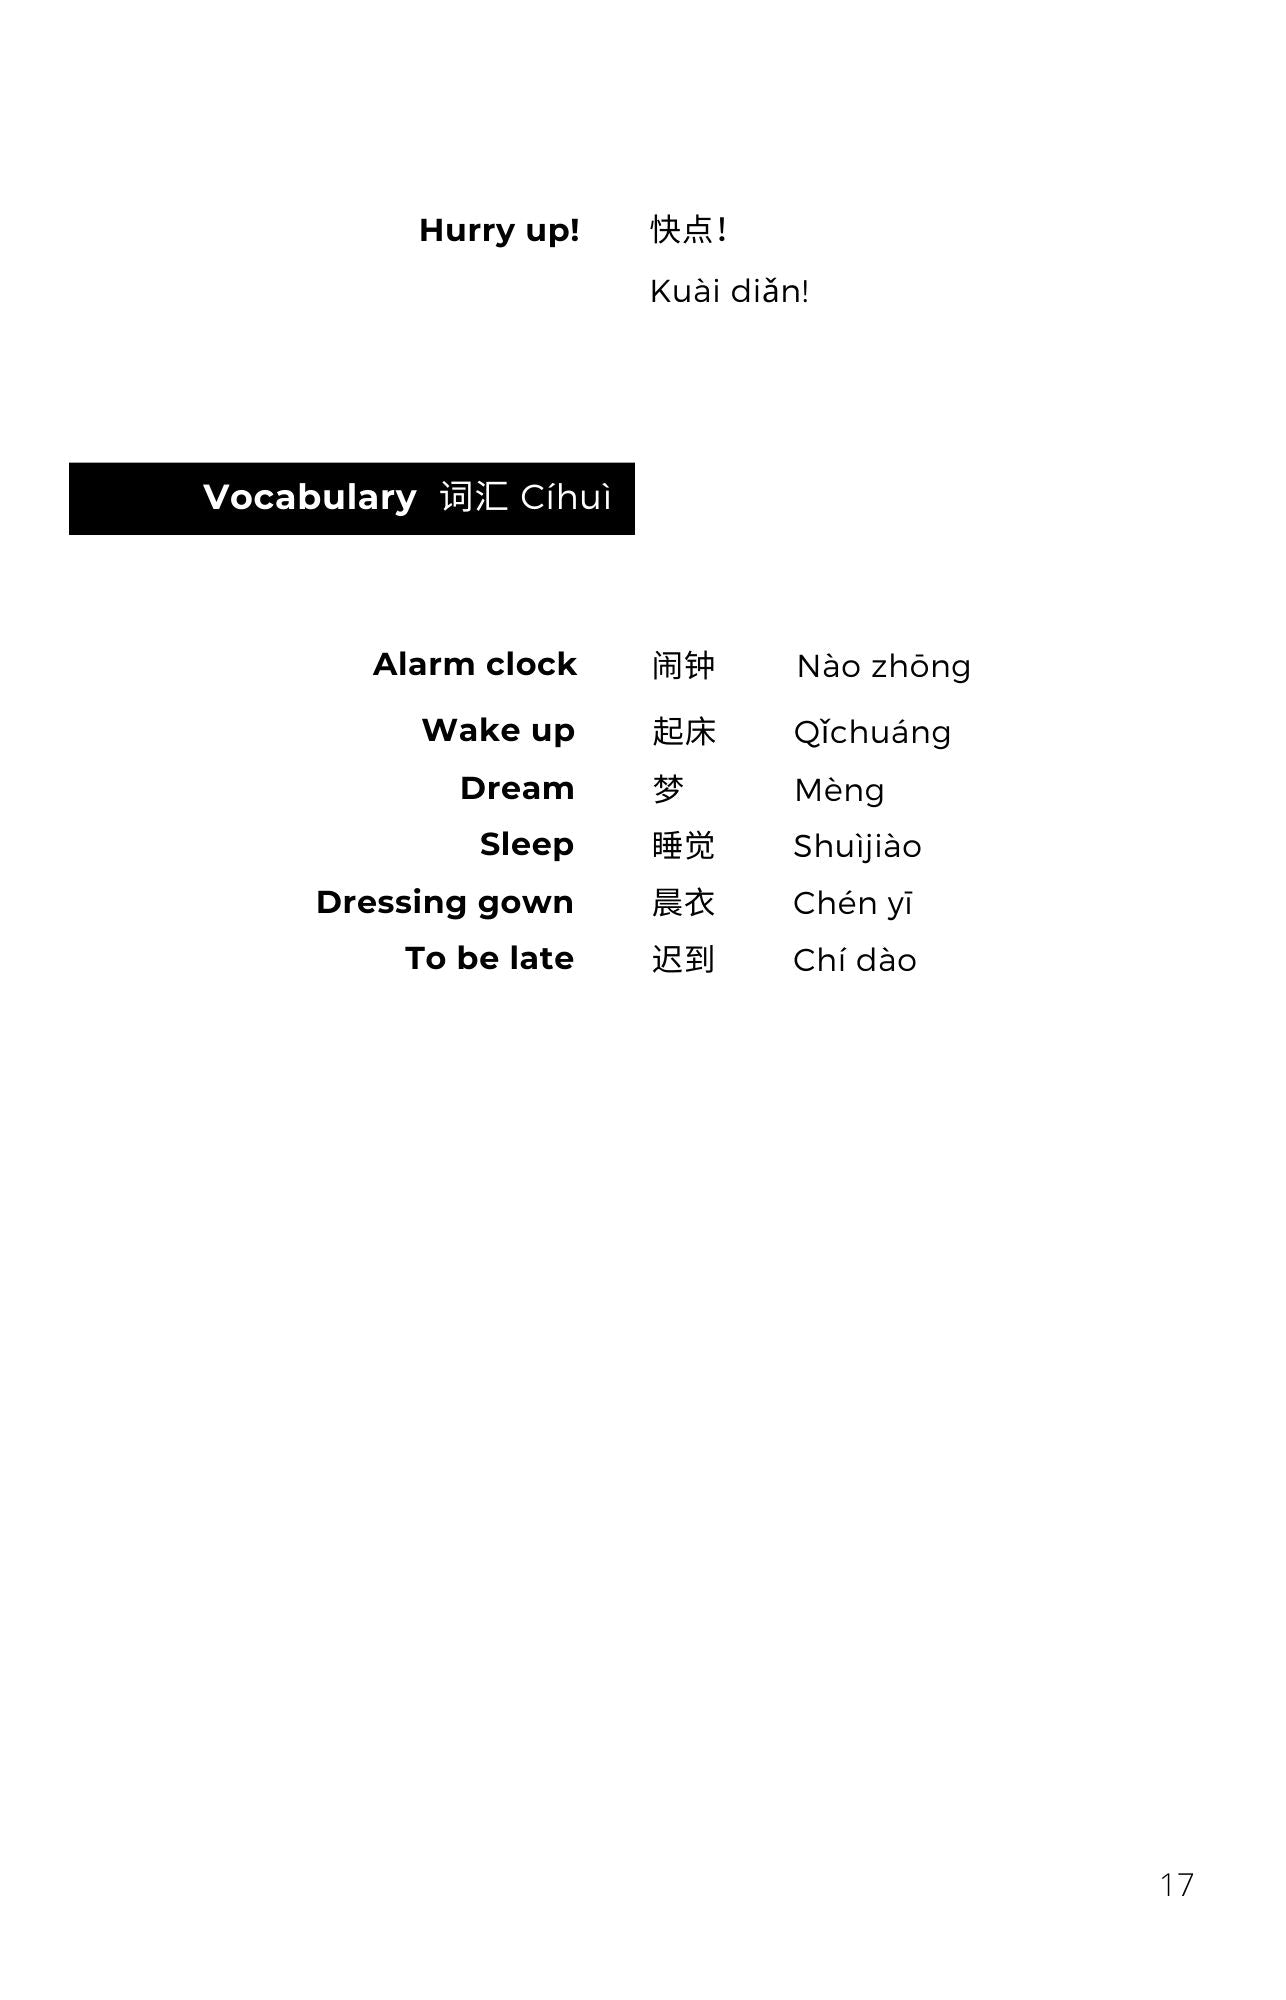 Every day Mandarin for Parents: Introduce Chinese at home with these every day phrases